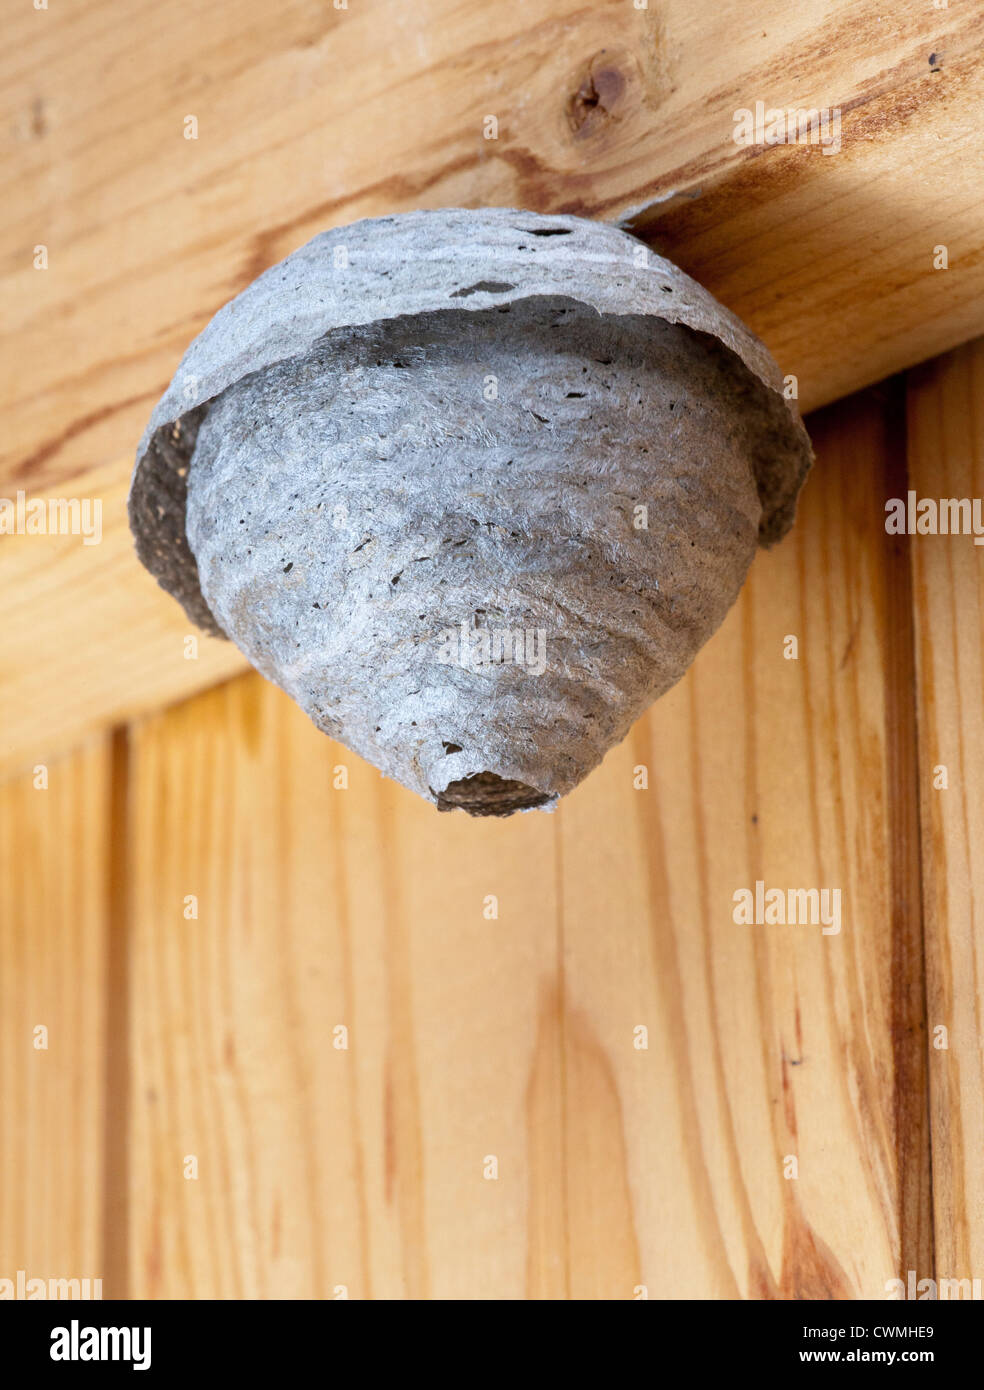 small wasp nest at early stage of stage development in 